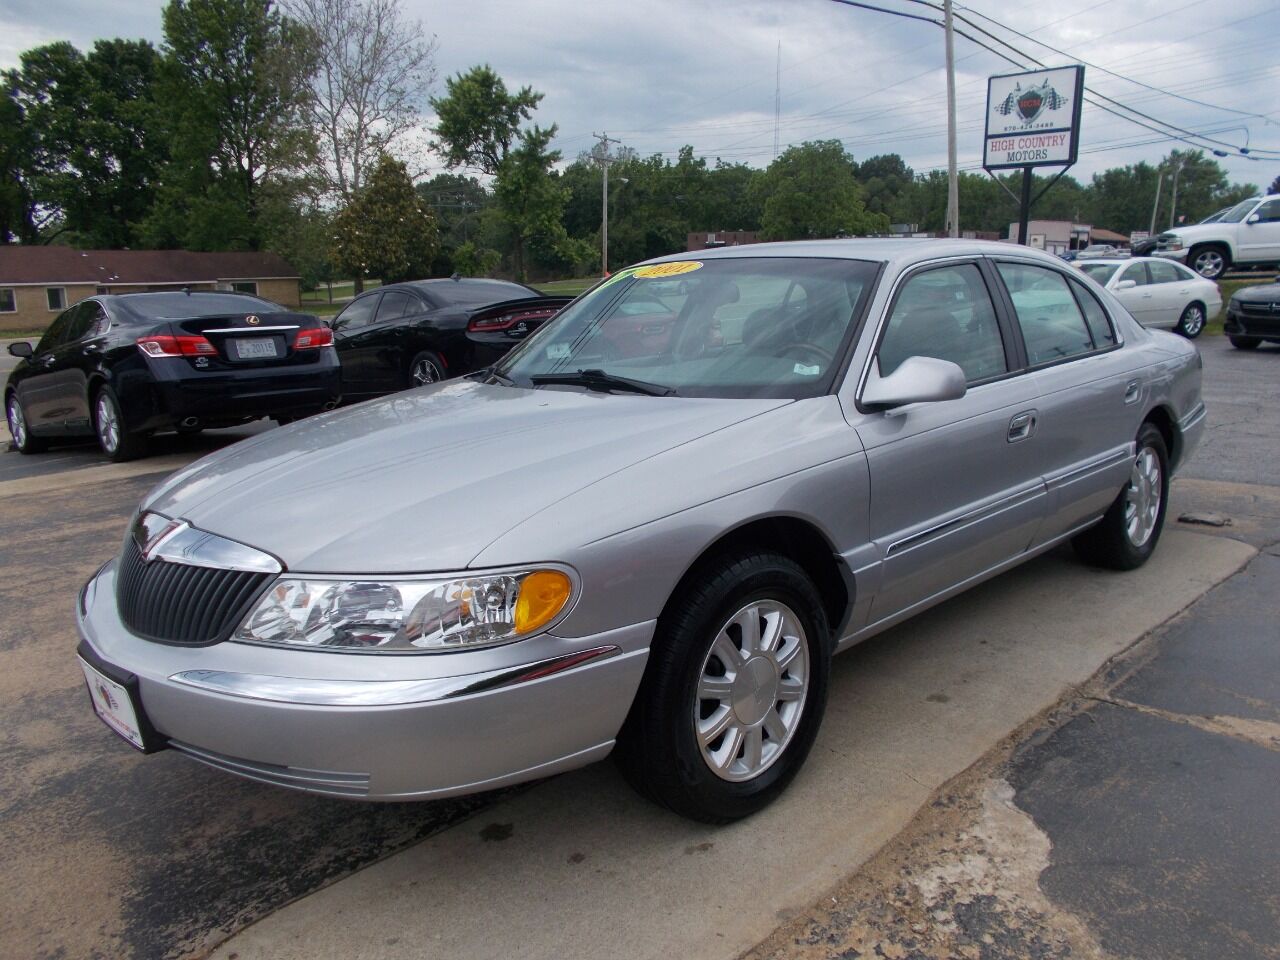 2001 Lincoln Continental | KTLO